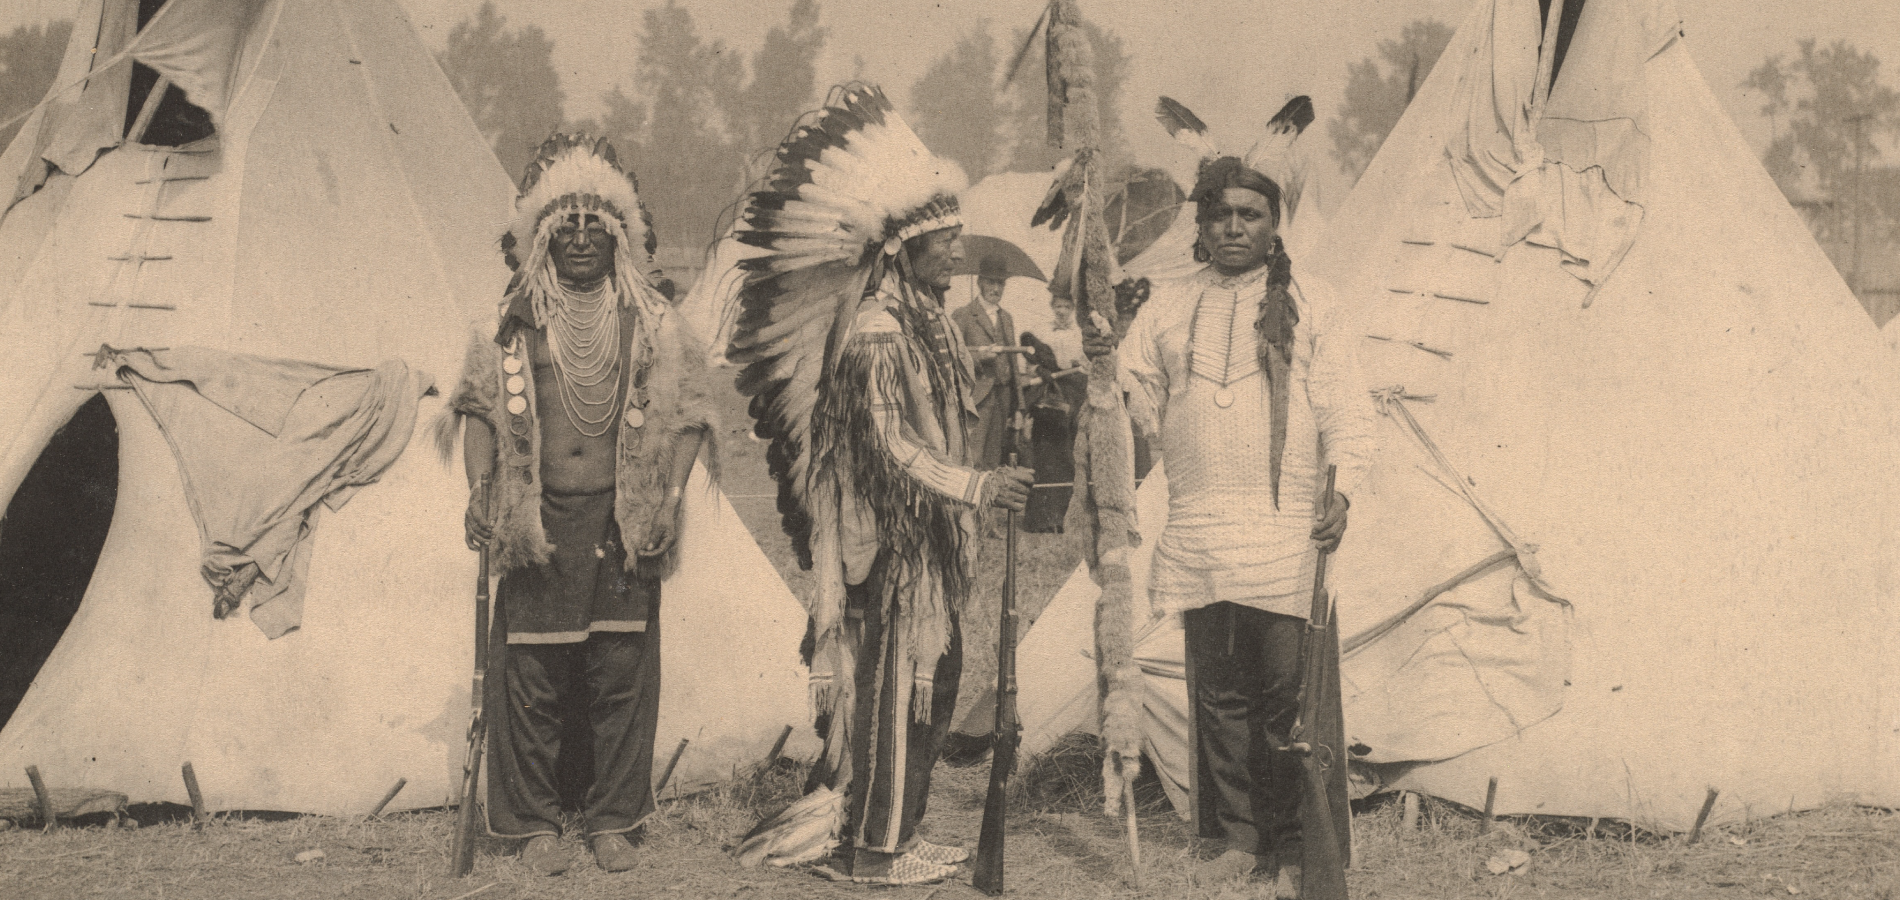 historical image of indigenous peoples